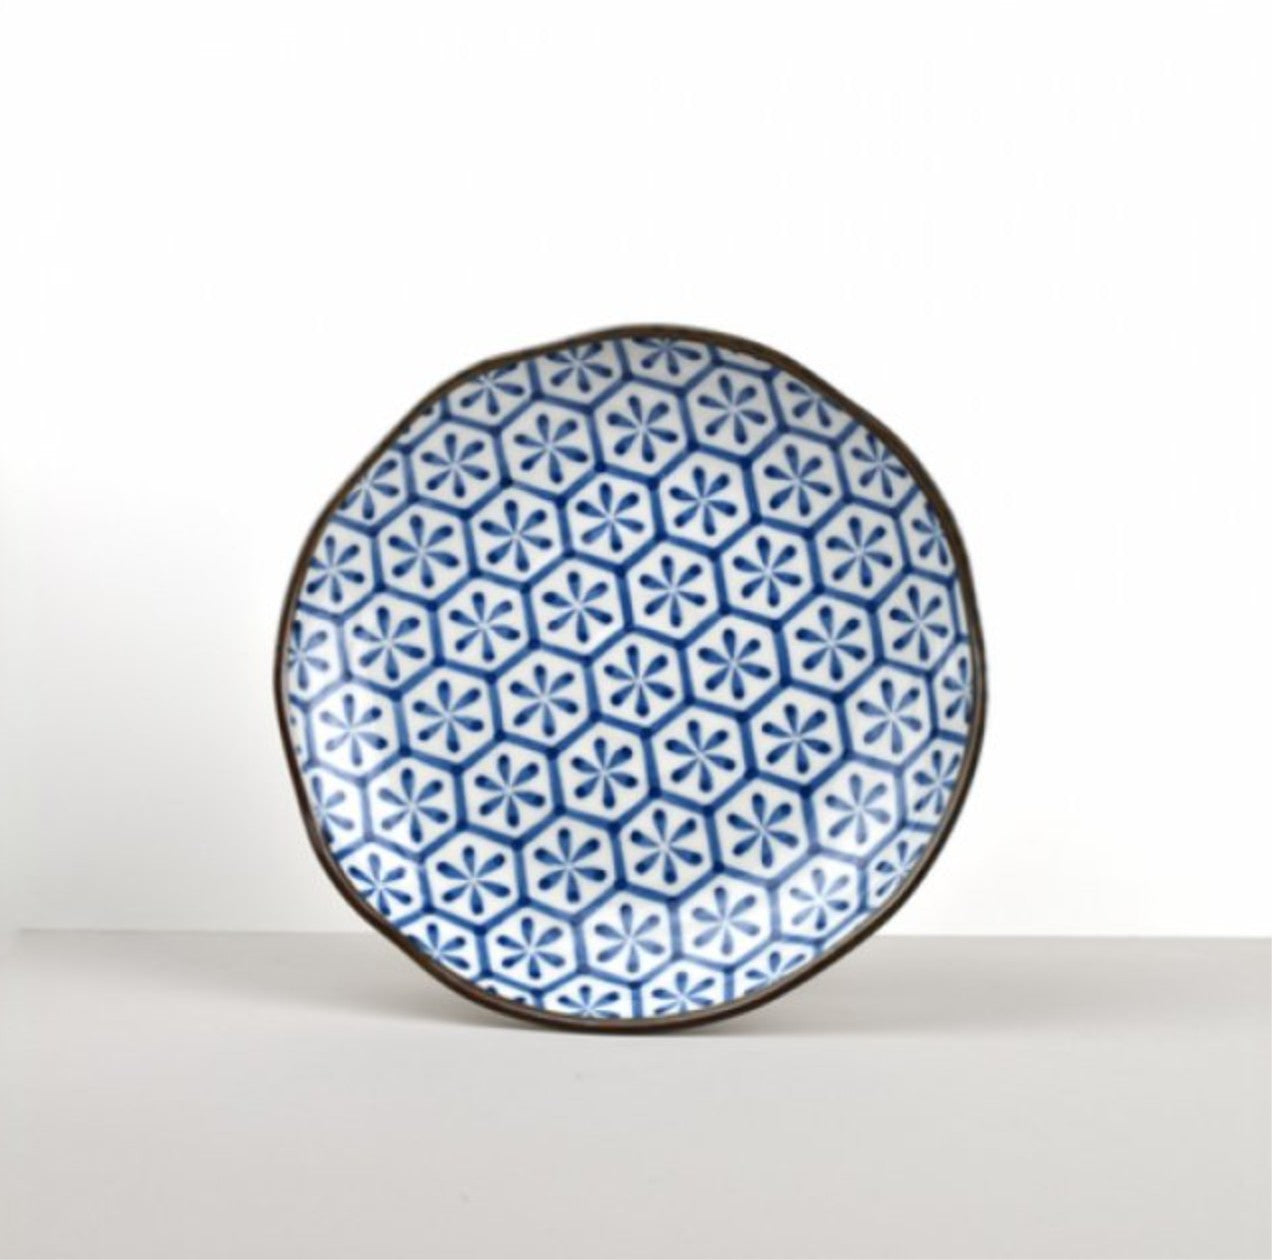 Round Plate Hexagon Flower 23cm · €17 · CURATED BY EYEDS